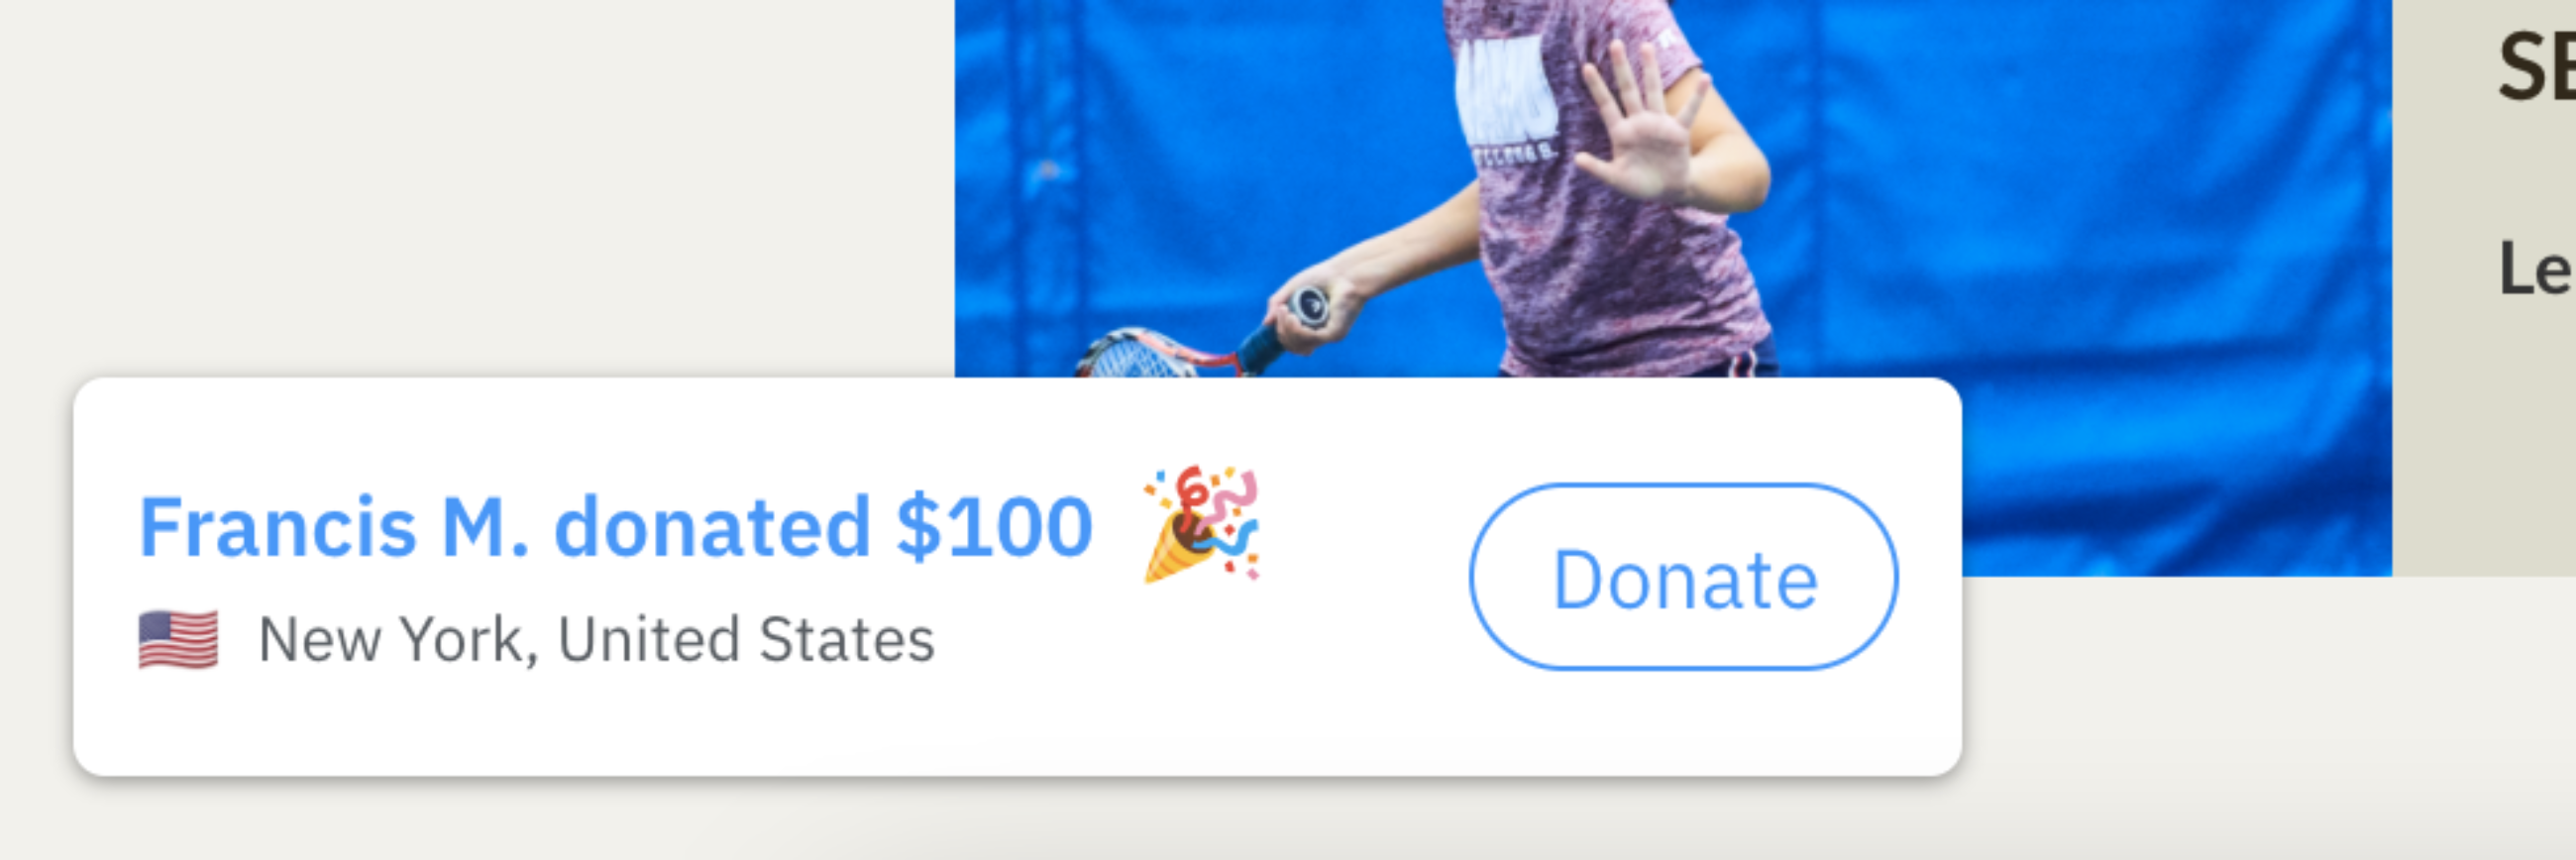 Popup that shows recent donation amount, location and name of donor